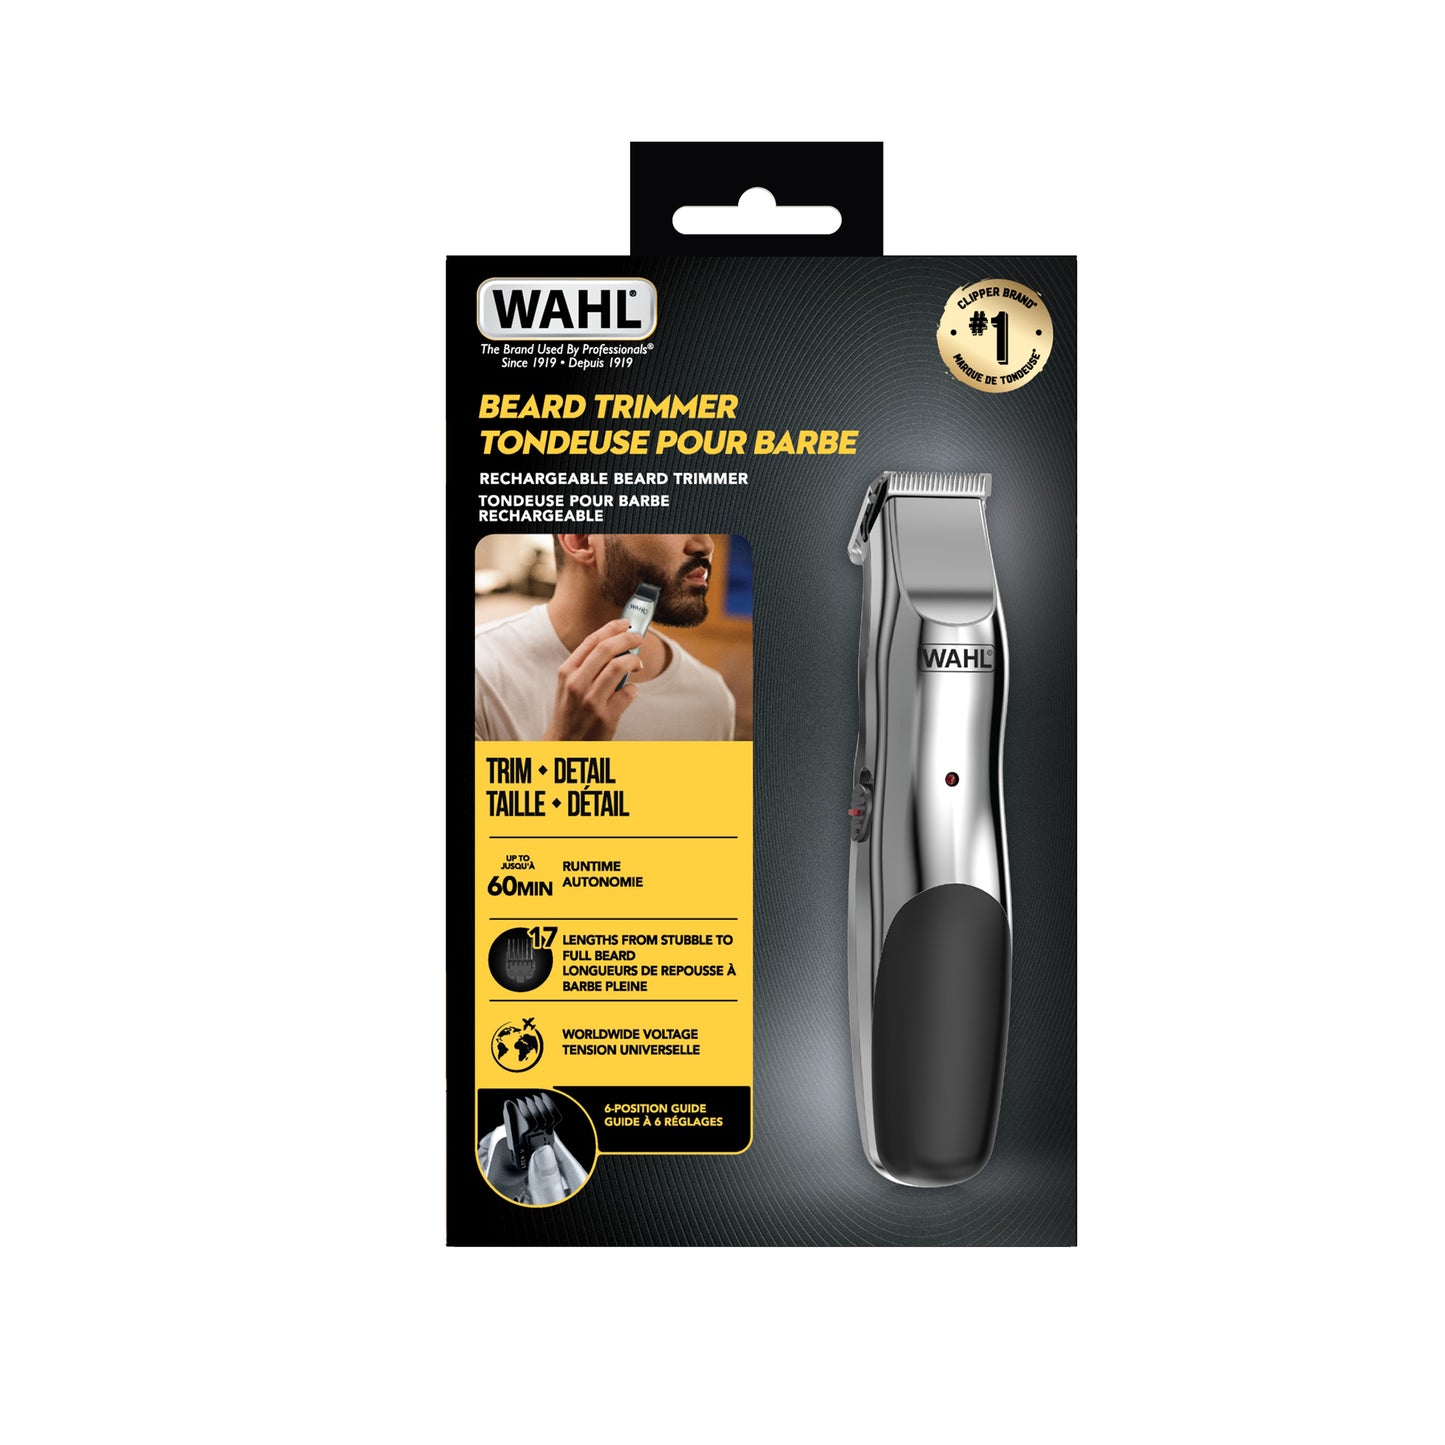 RECHARGEABLE BEARD TRIMMER